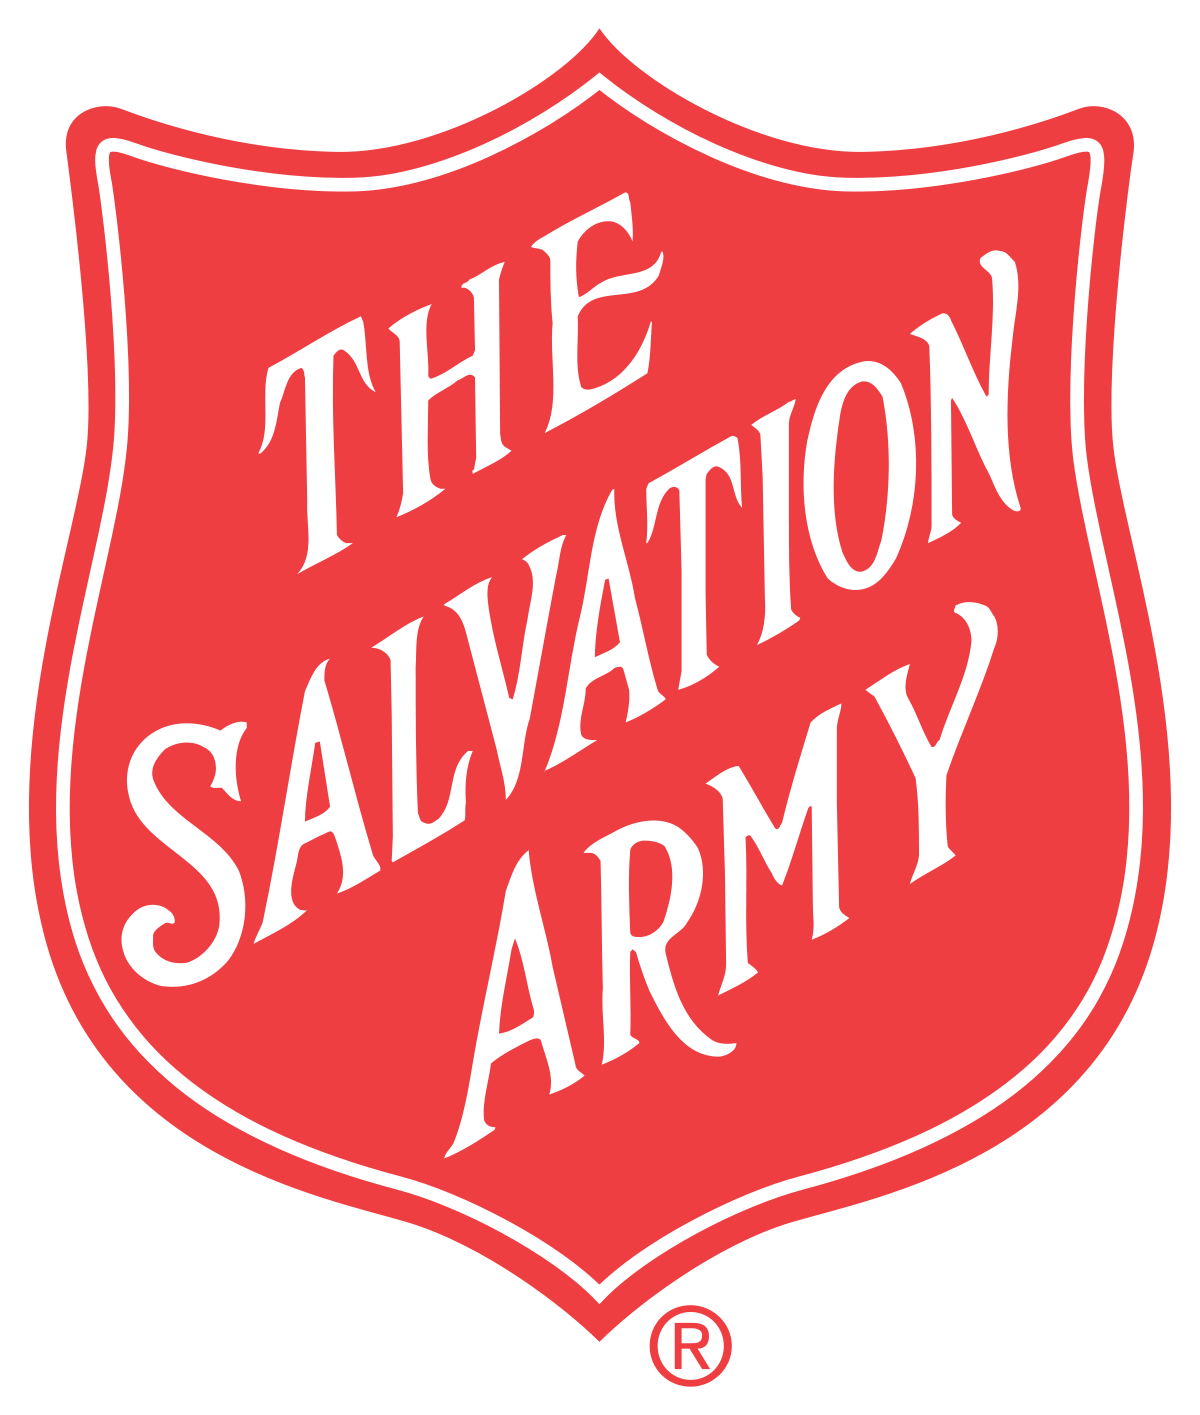 Tree with Red Shield Logo - The Salvation Army